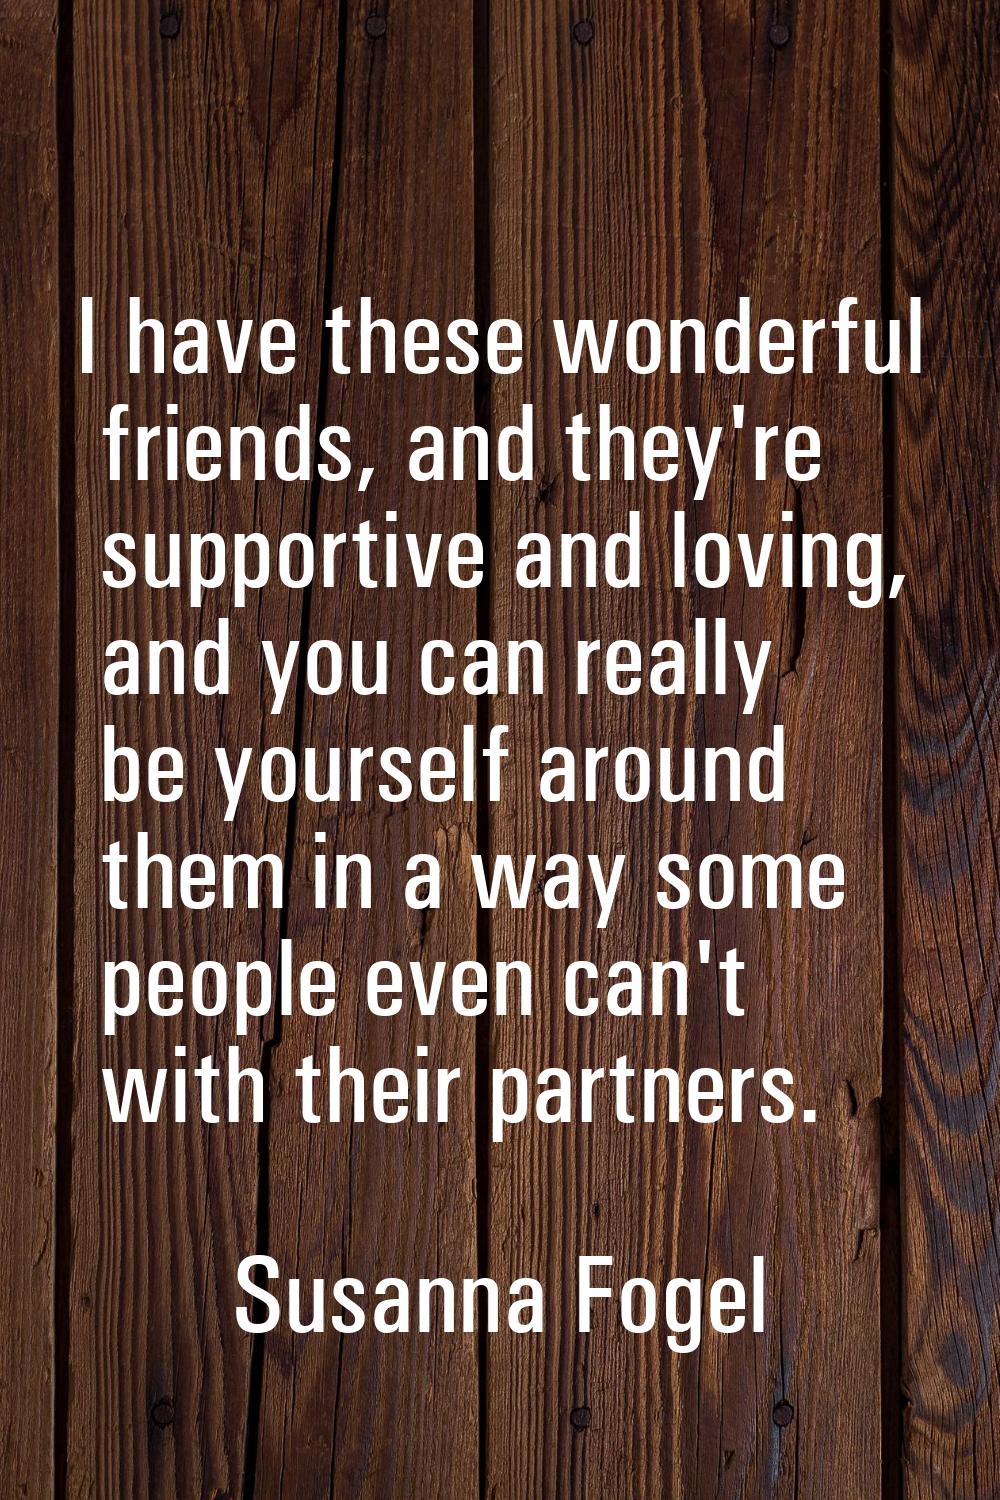 I have these wonderful friends, and they're supportive and loving, and you can really be yourself a